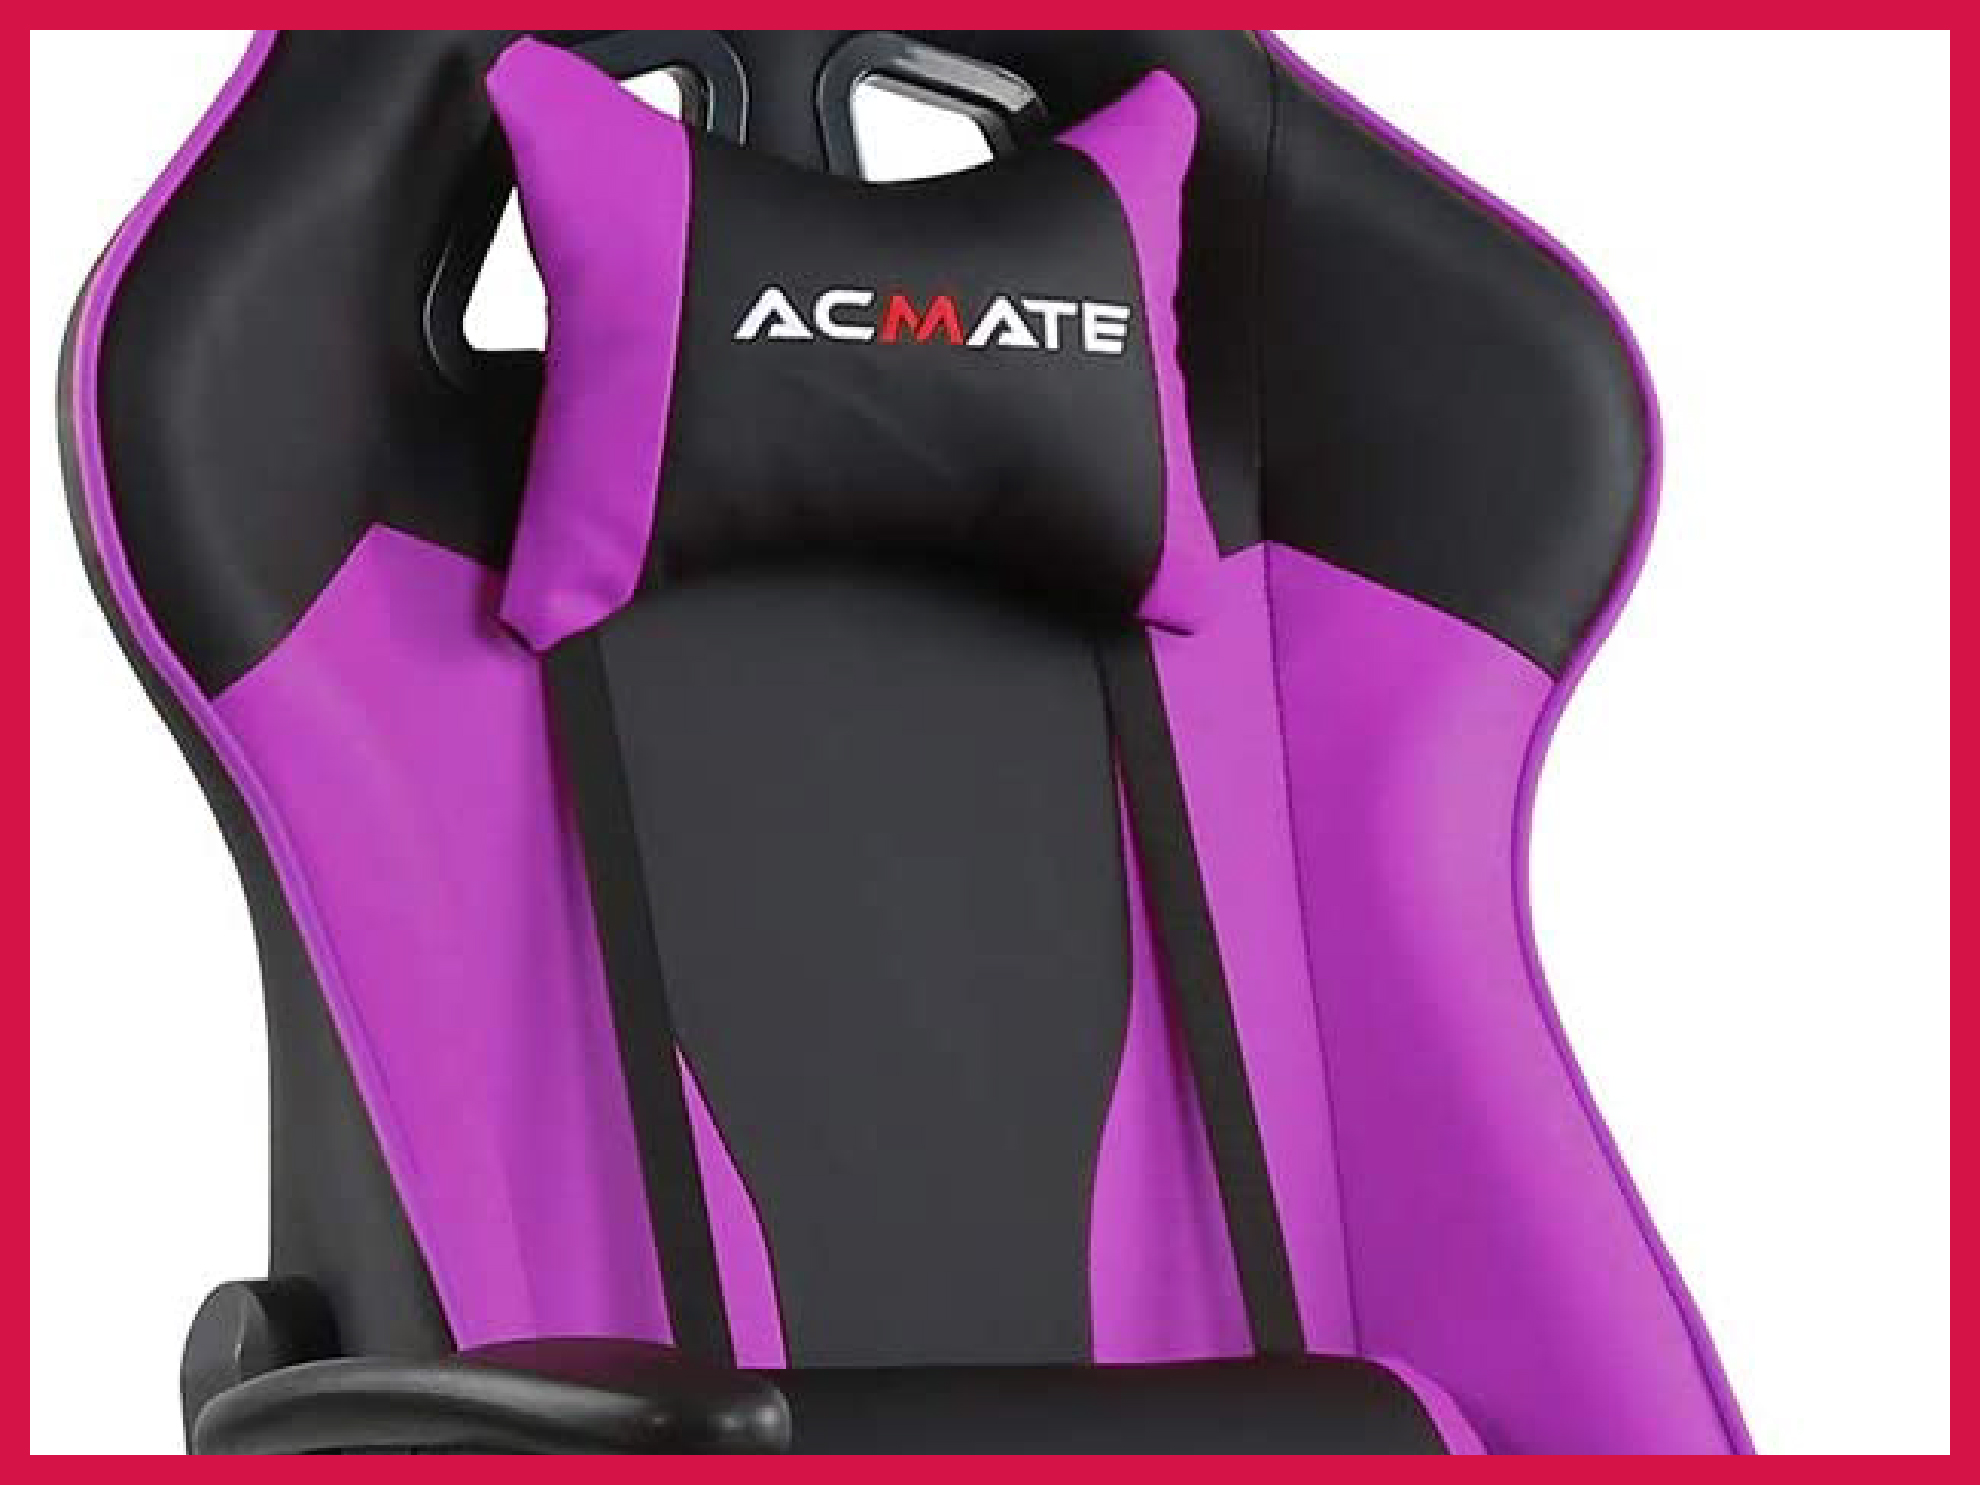 best purple gaming chairs